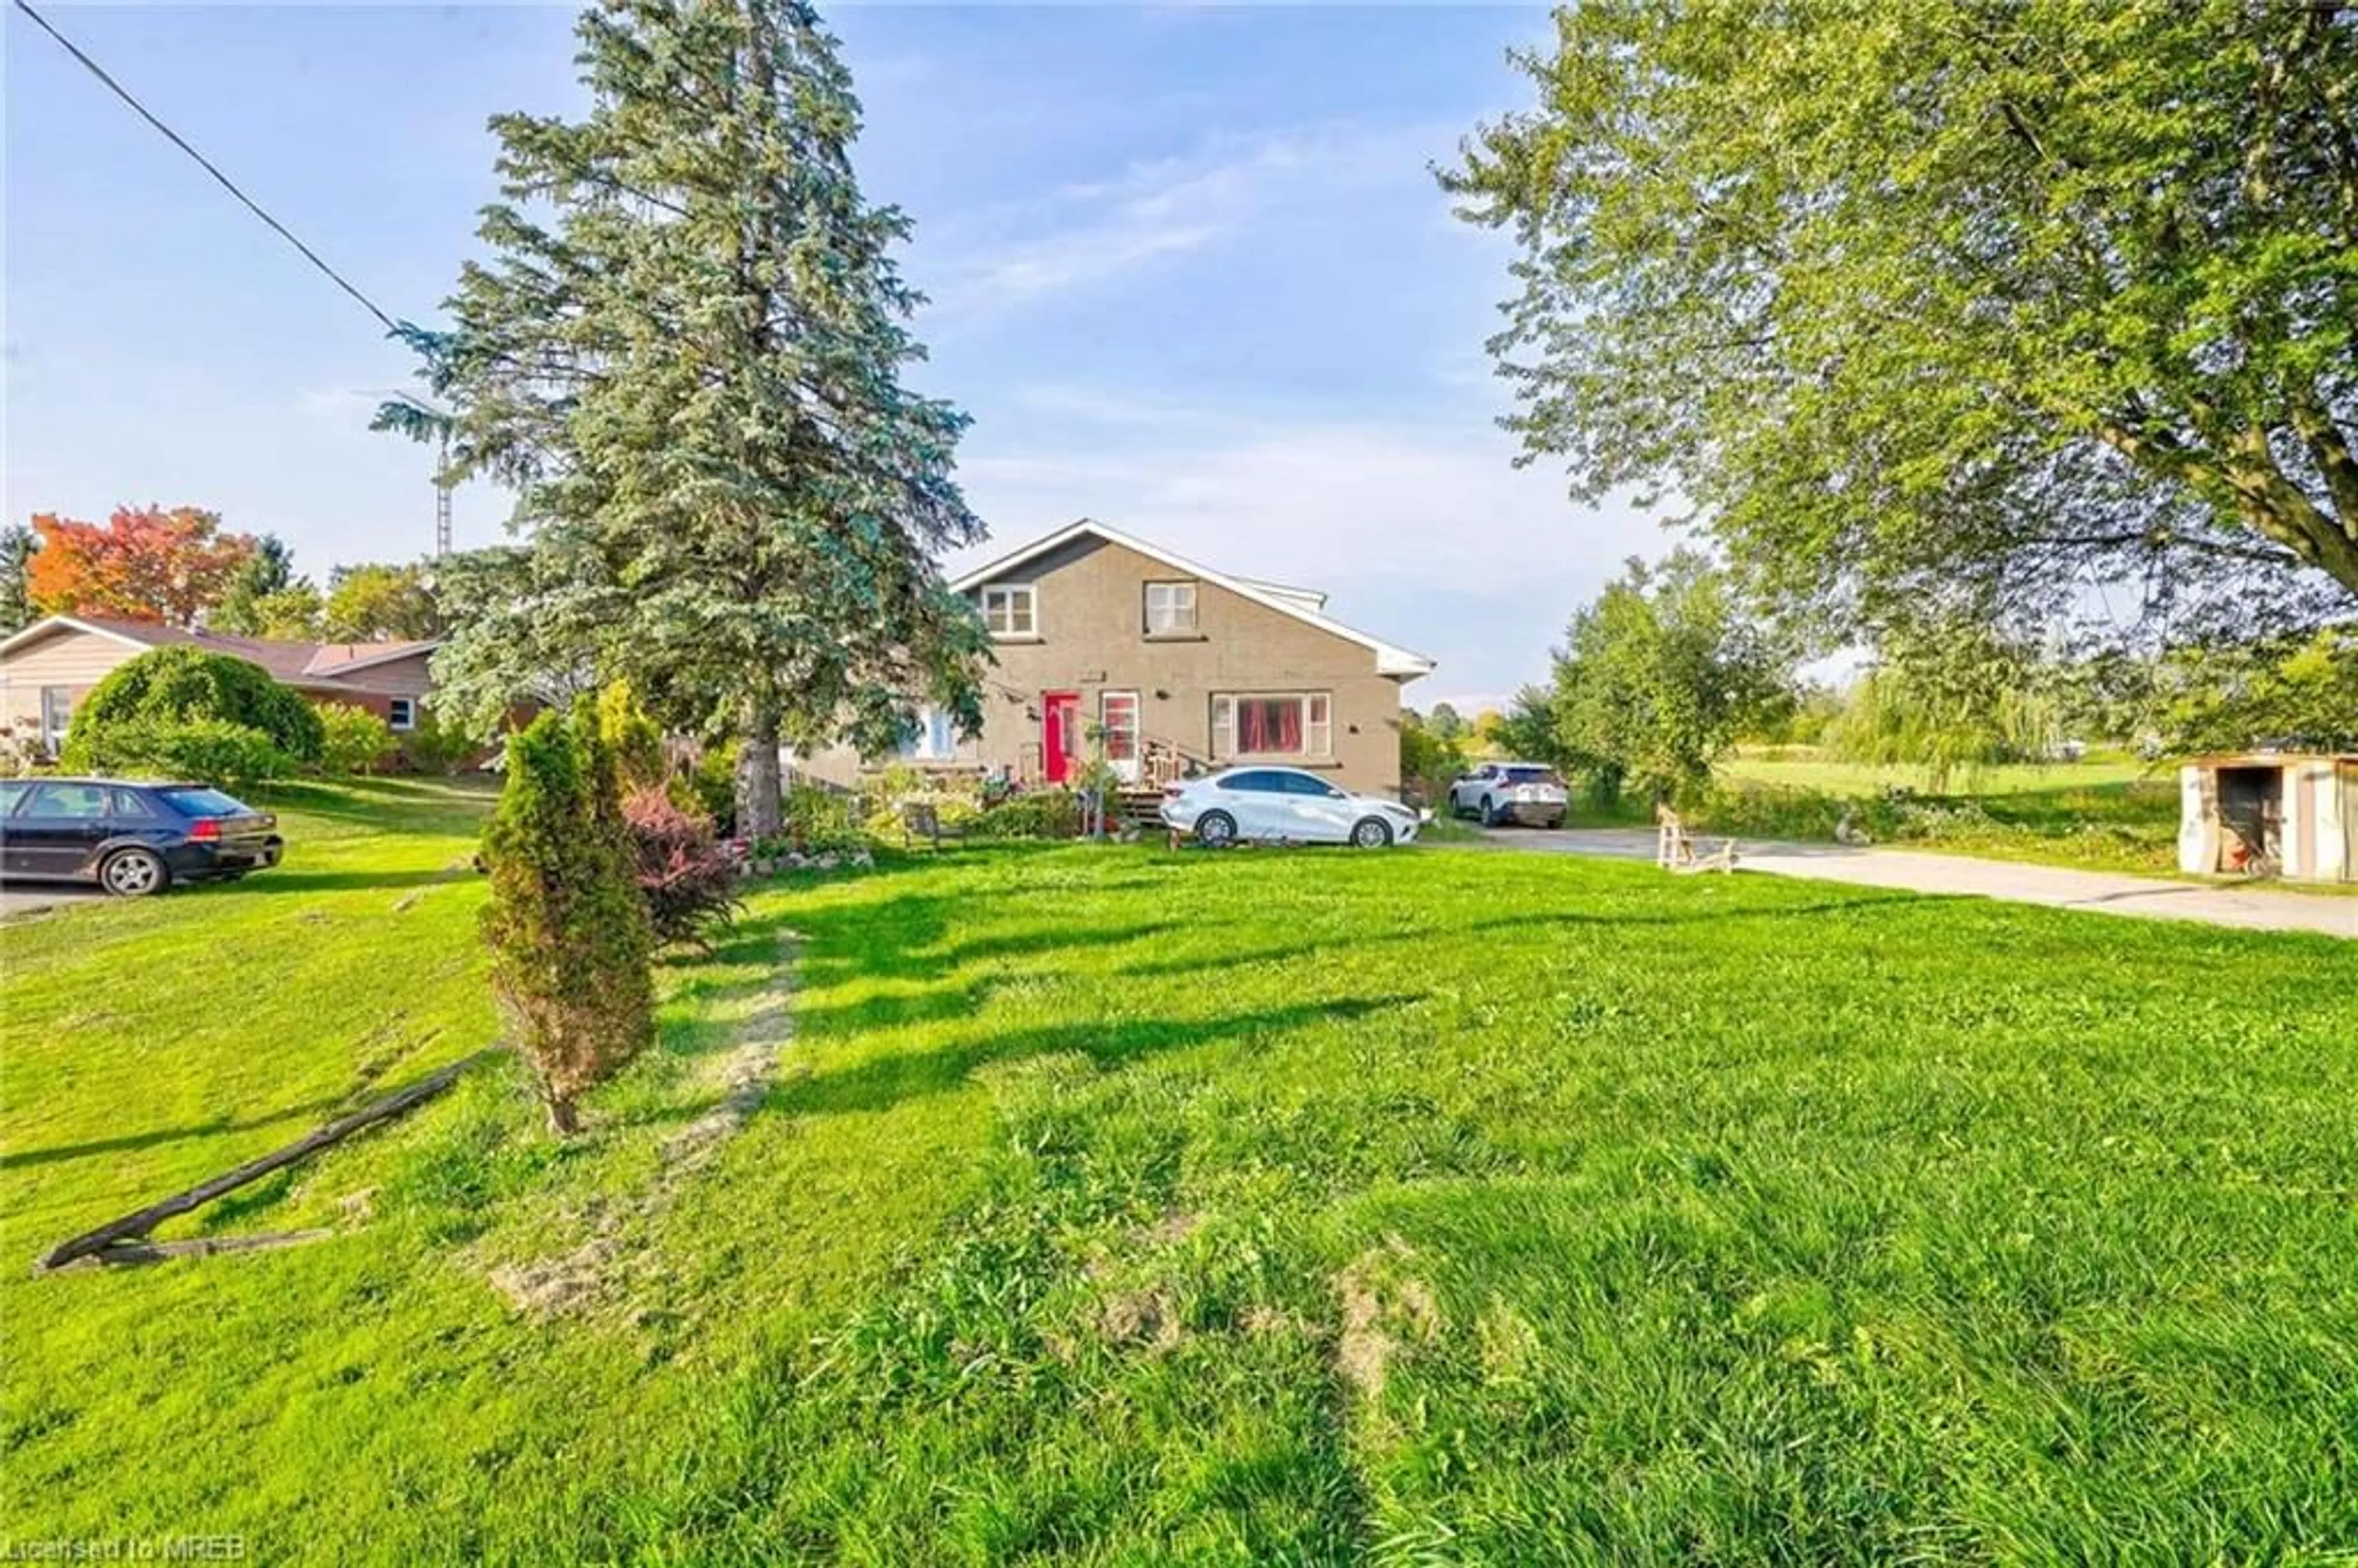 Fenced yard for 2216 Highway 2, Bowmanville Ontario L1C 3K7